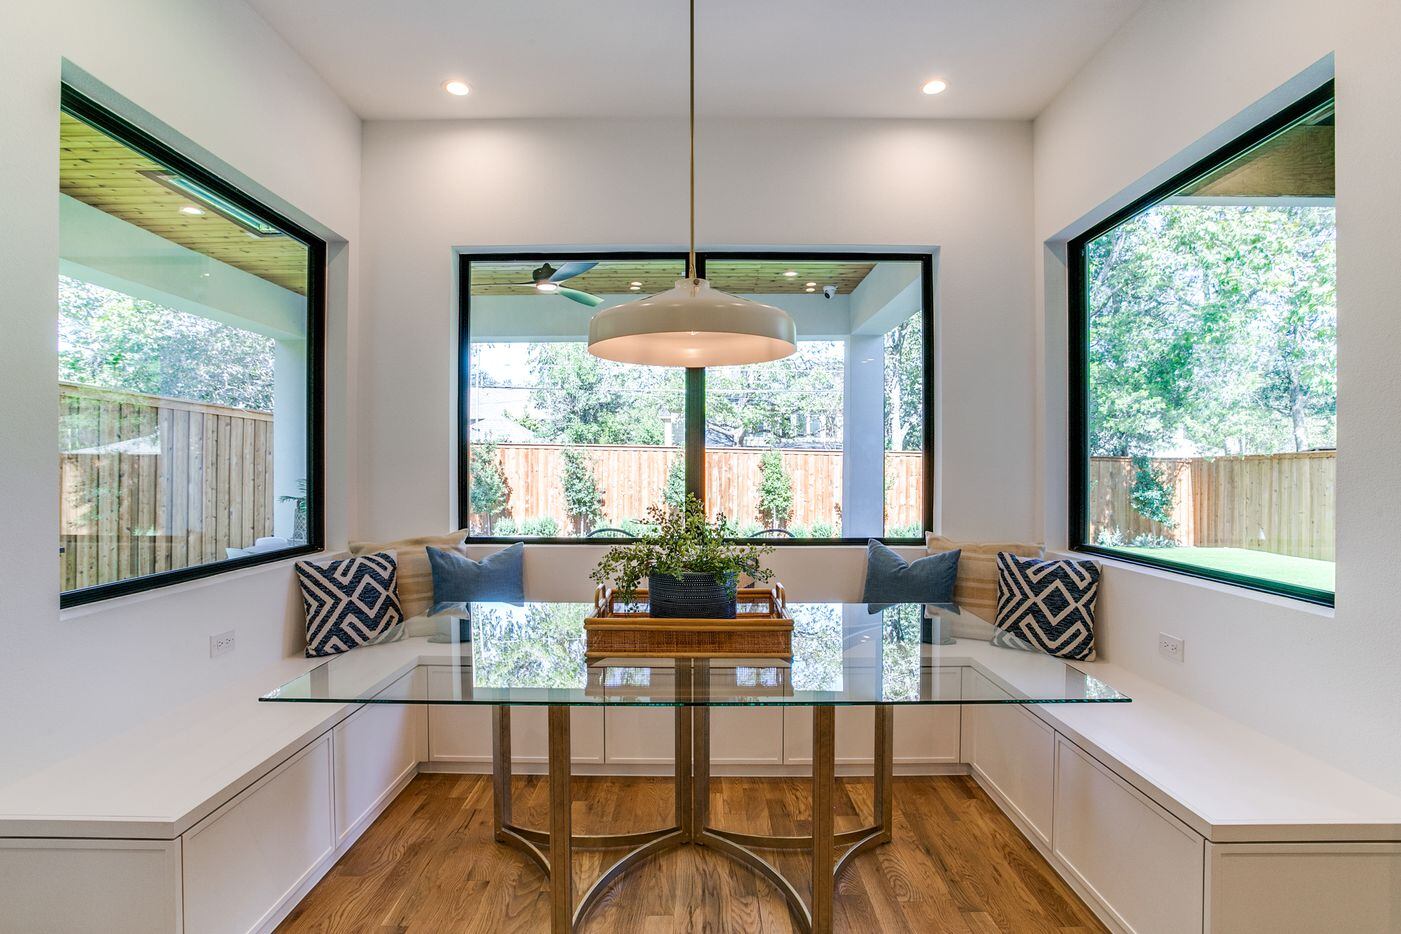 The breakfast nook features a glass table and built-in seating.